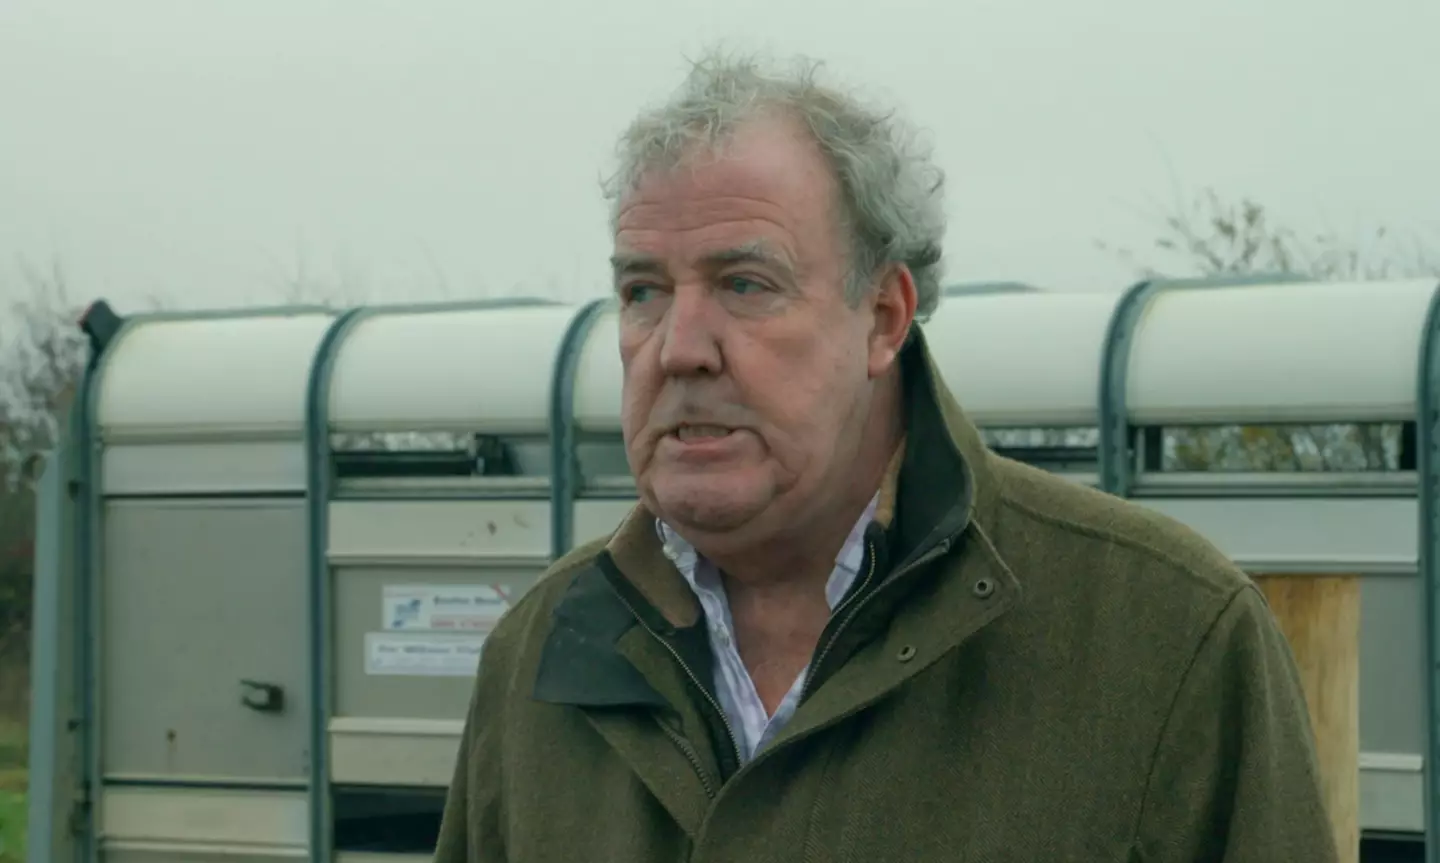 Clarkson in the second episode of the third season. (Amazon Prime Video)